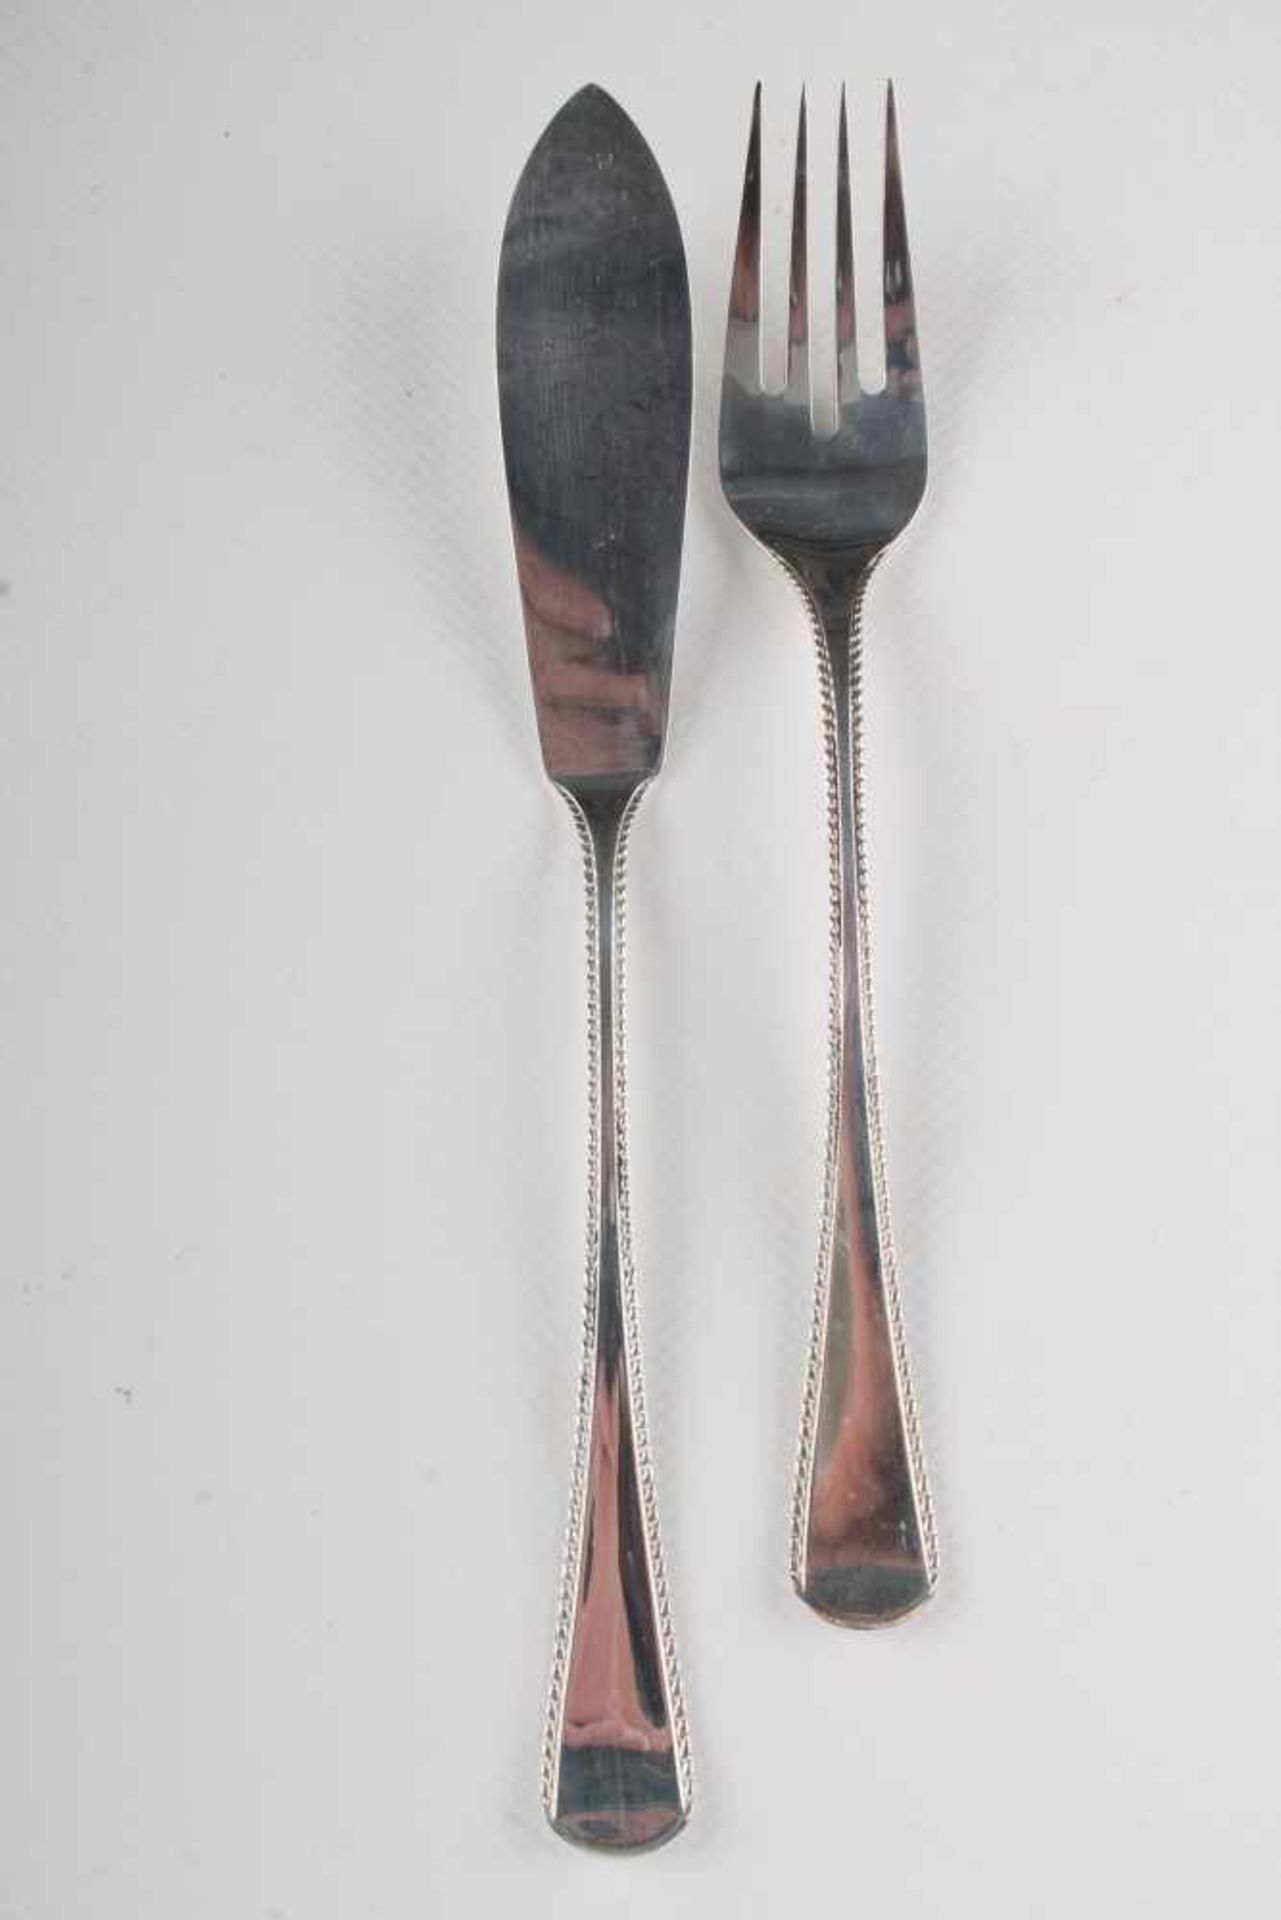 Robbe & Berking 800 Silber Fischbesteck für 6 Personen, fish cutlery for 6 persons, - Image 2 of 5